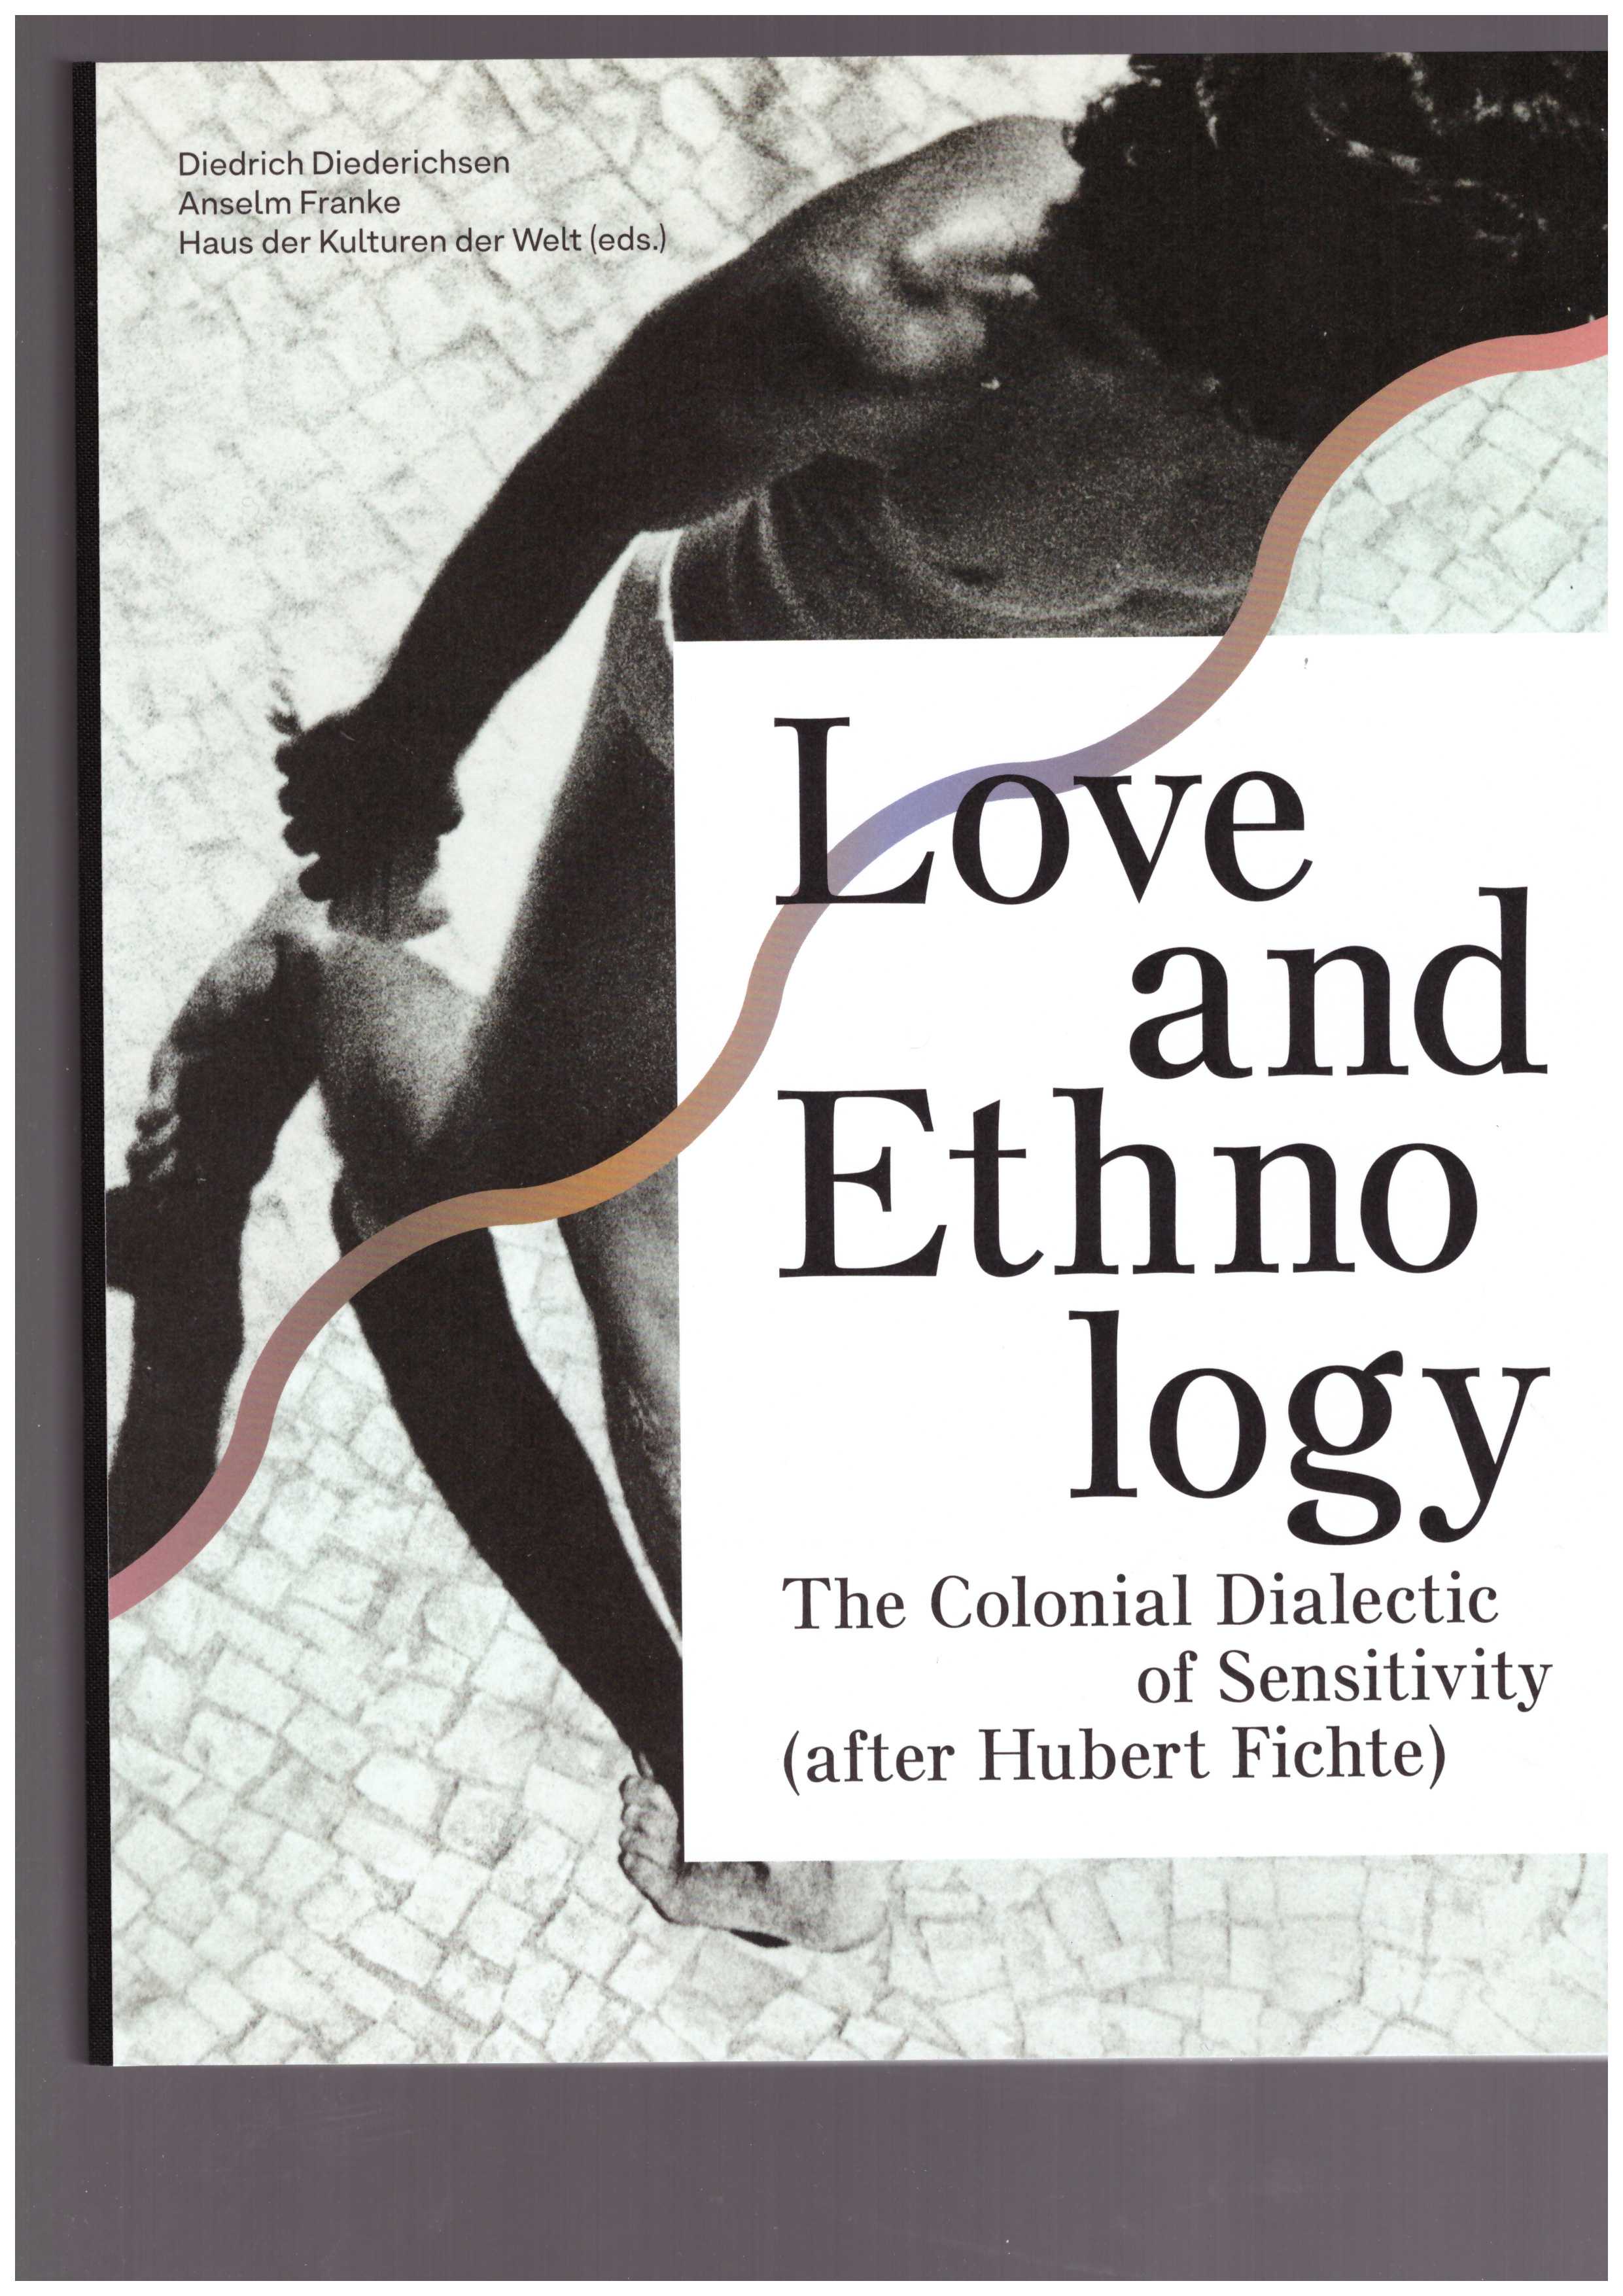 DIEDERICHSEN, Diedrich; FRANKE, Anselm (eds.) - Love and Ethnology – The Colonial Dialectic of Sensitivity (after Hubert Fichte)